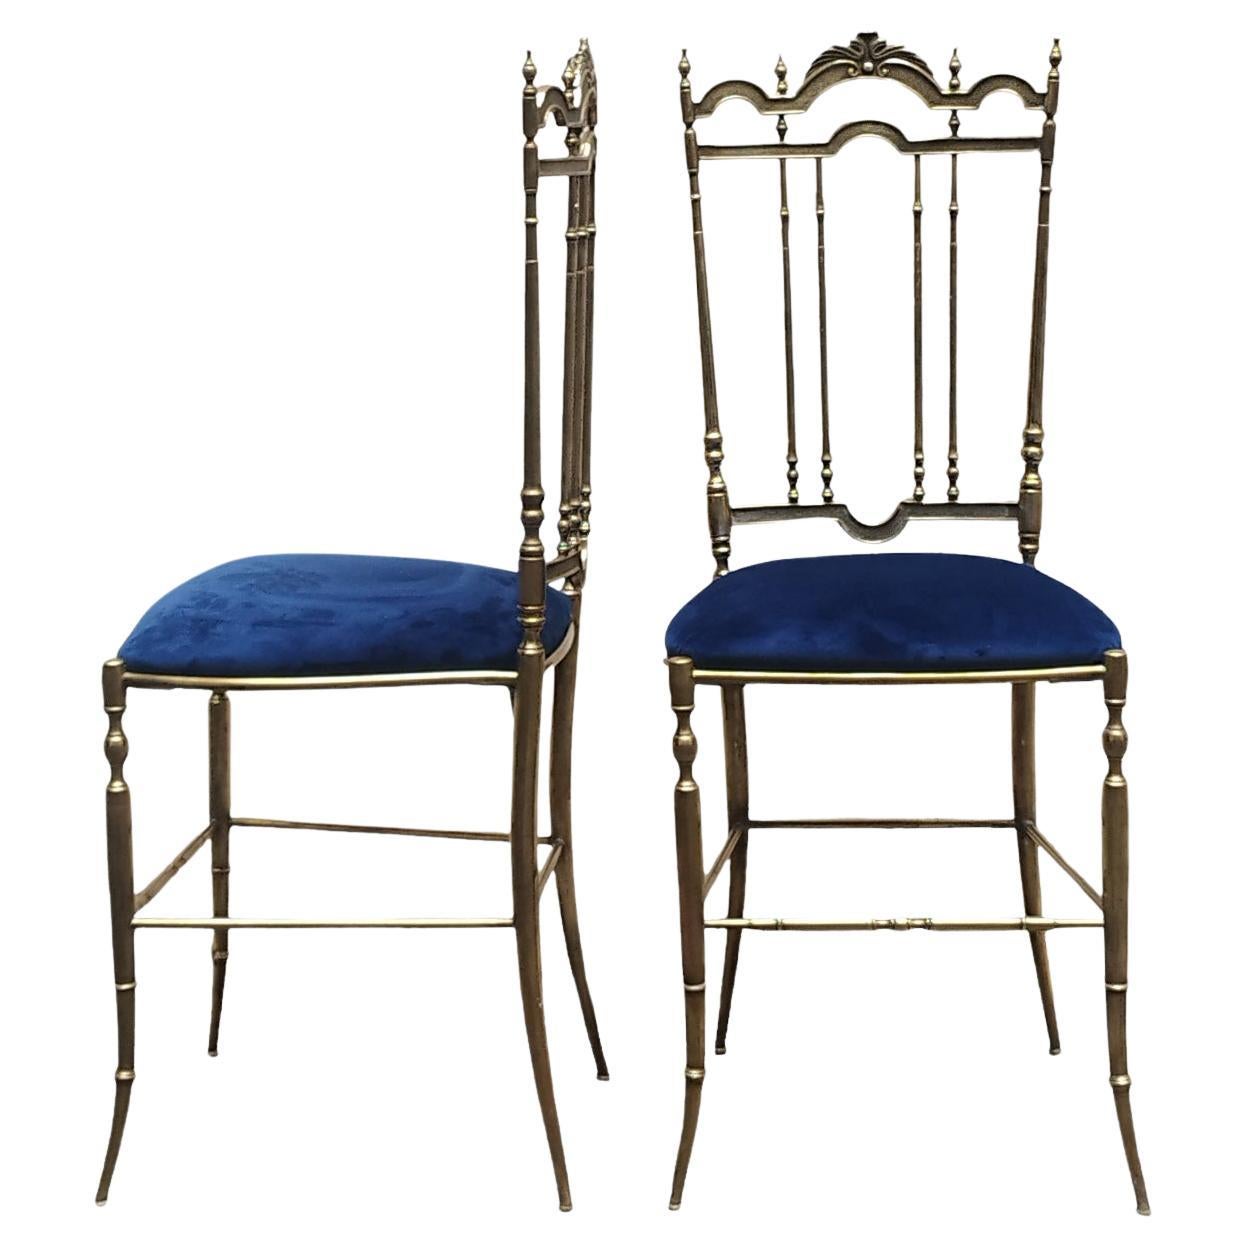 Pair of Chiavarine He and She Chairs in Brass and Velvet, Italy 1950s